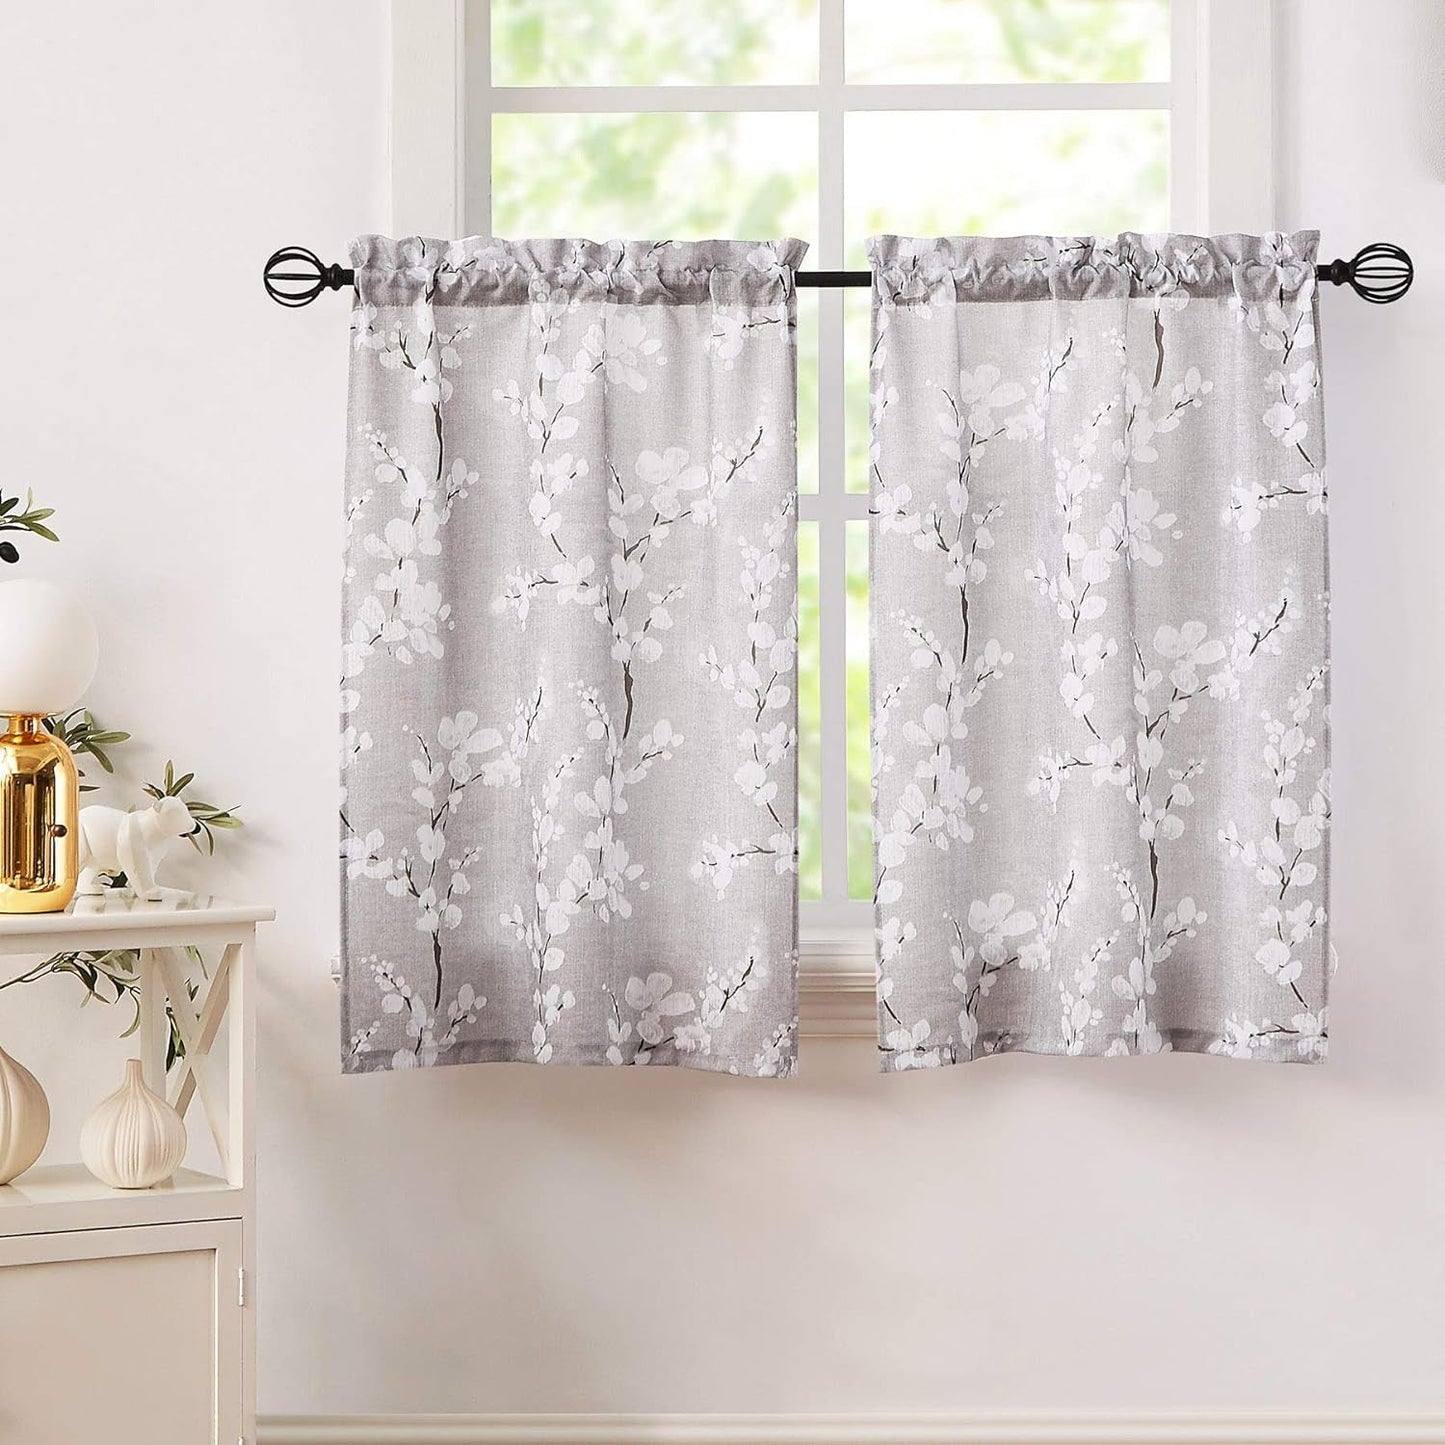 FMFUNCTEX Gray-White Bathroom Tier Curtains for Kitchen 36Inches Long Floral Printed Half Window Panels for Living Room Café Basement Rod Pocket 26”W/Panel, 2 Panels